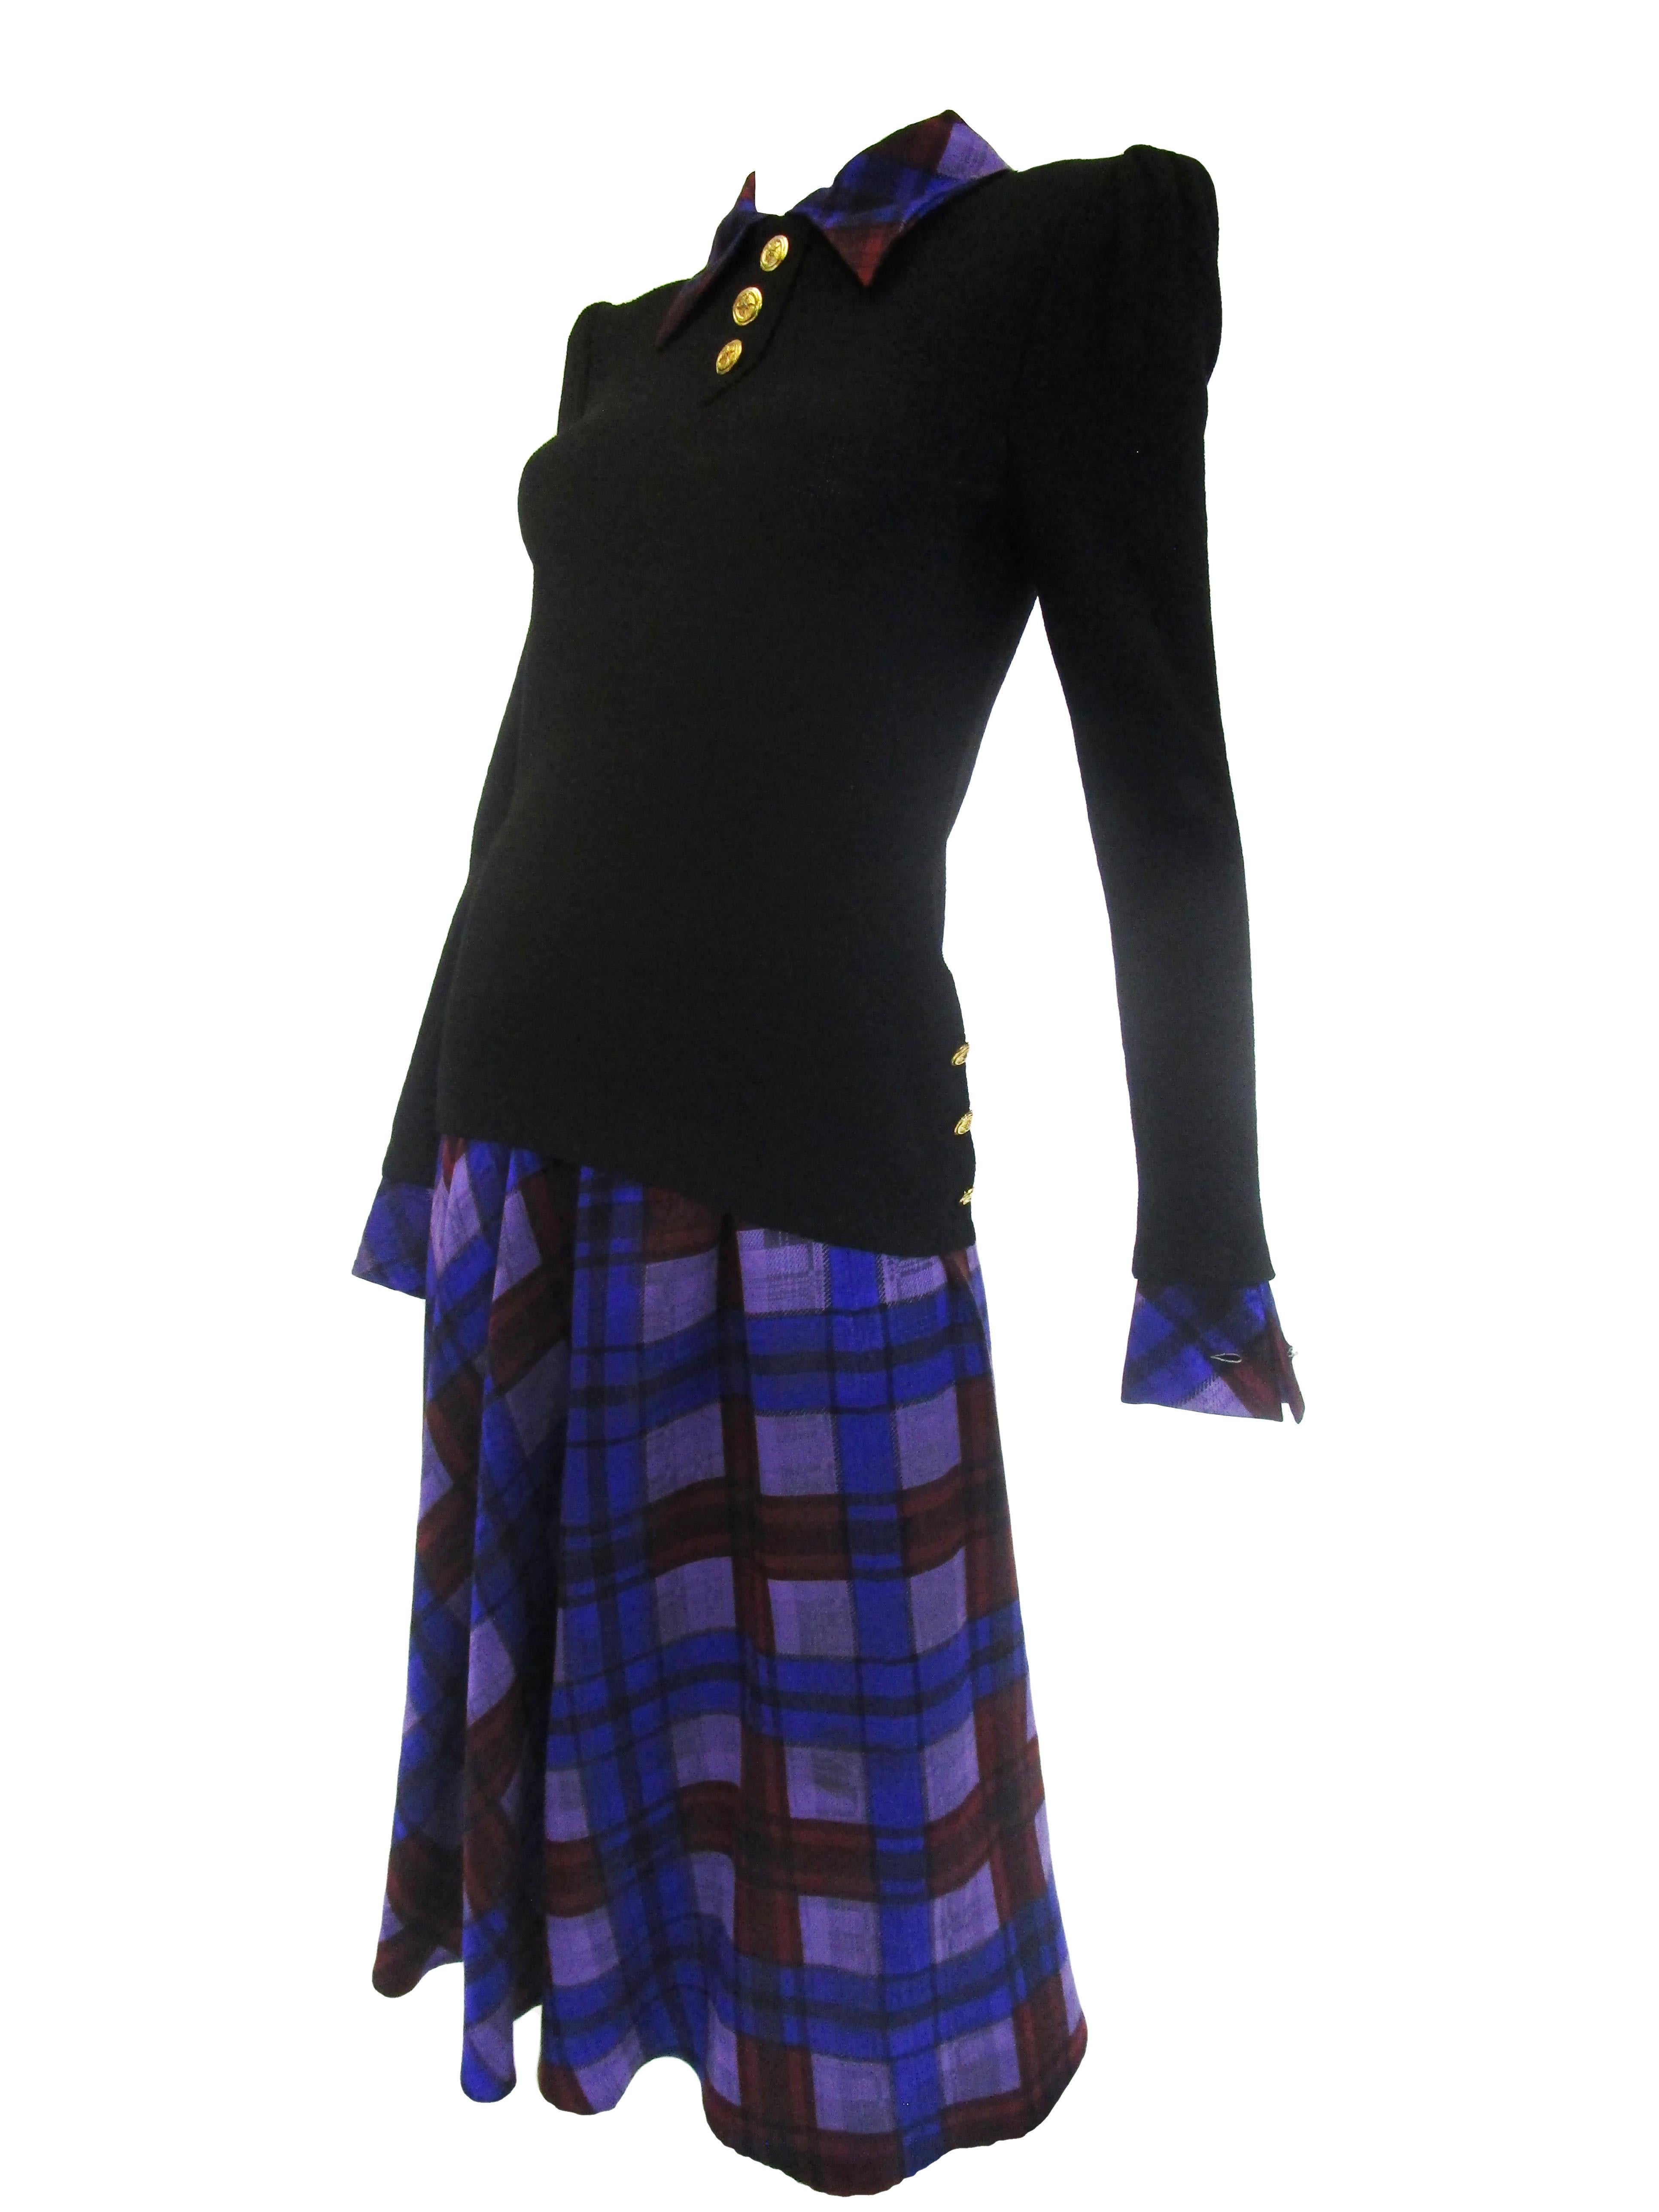 
This Adolfo sweater and skirt set is the perfect balance between fitted and flowing hitting all the pulse points of your figure.
It features a cozy black long sleeve sweater top adorned with gold buttons and a beautiful purple and red plaid silk